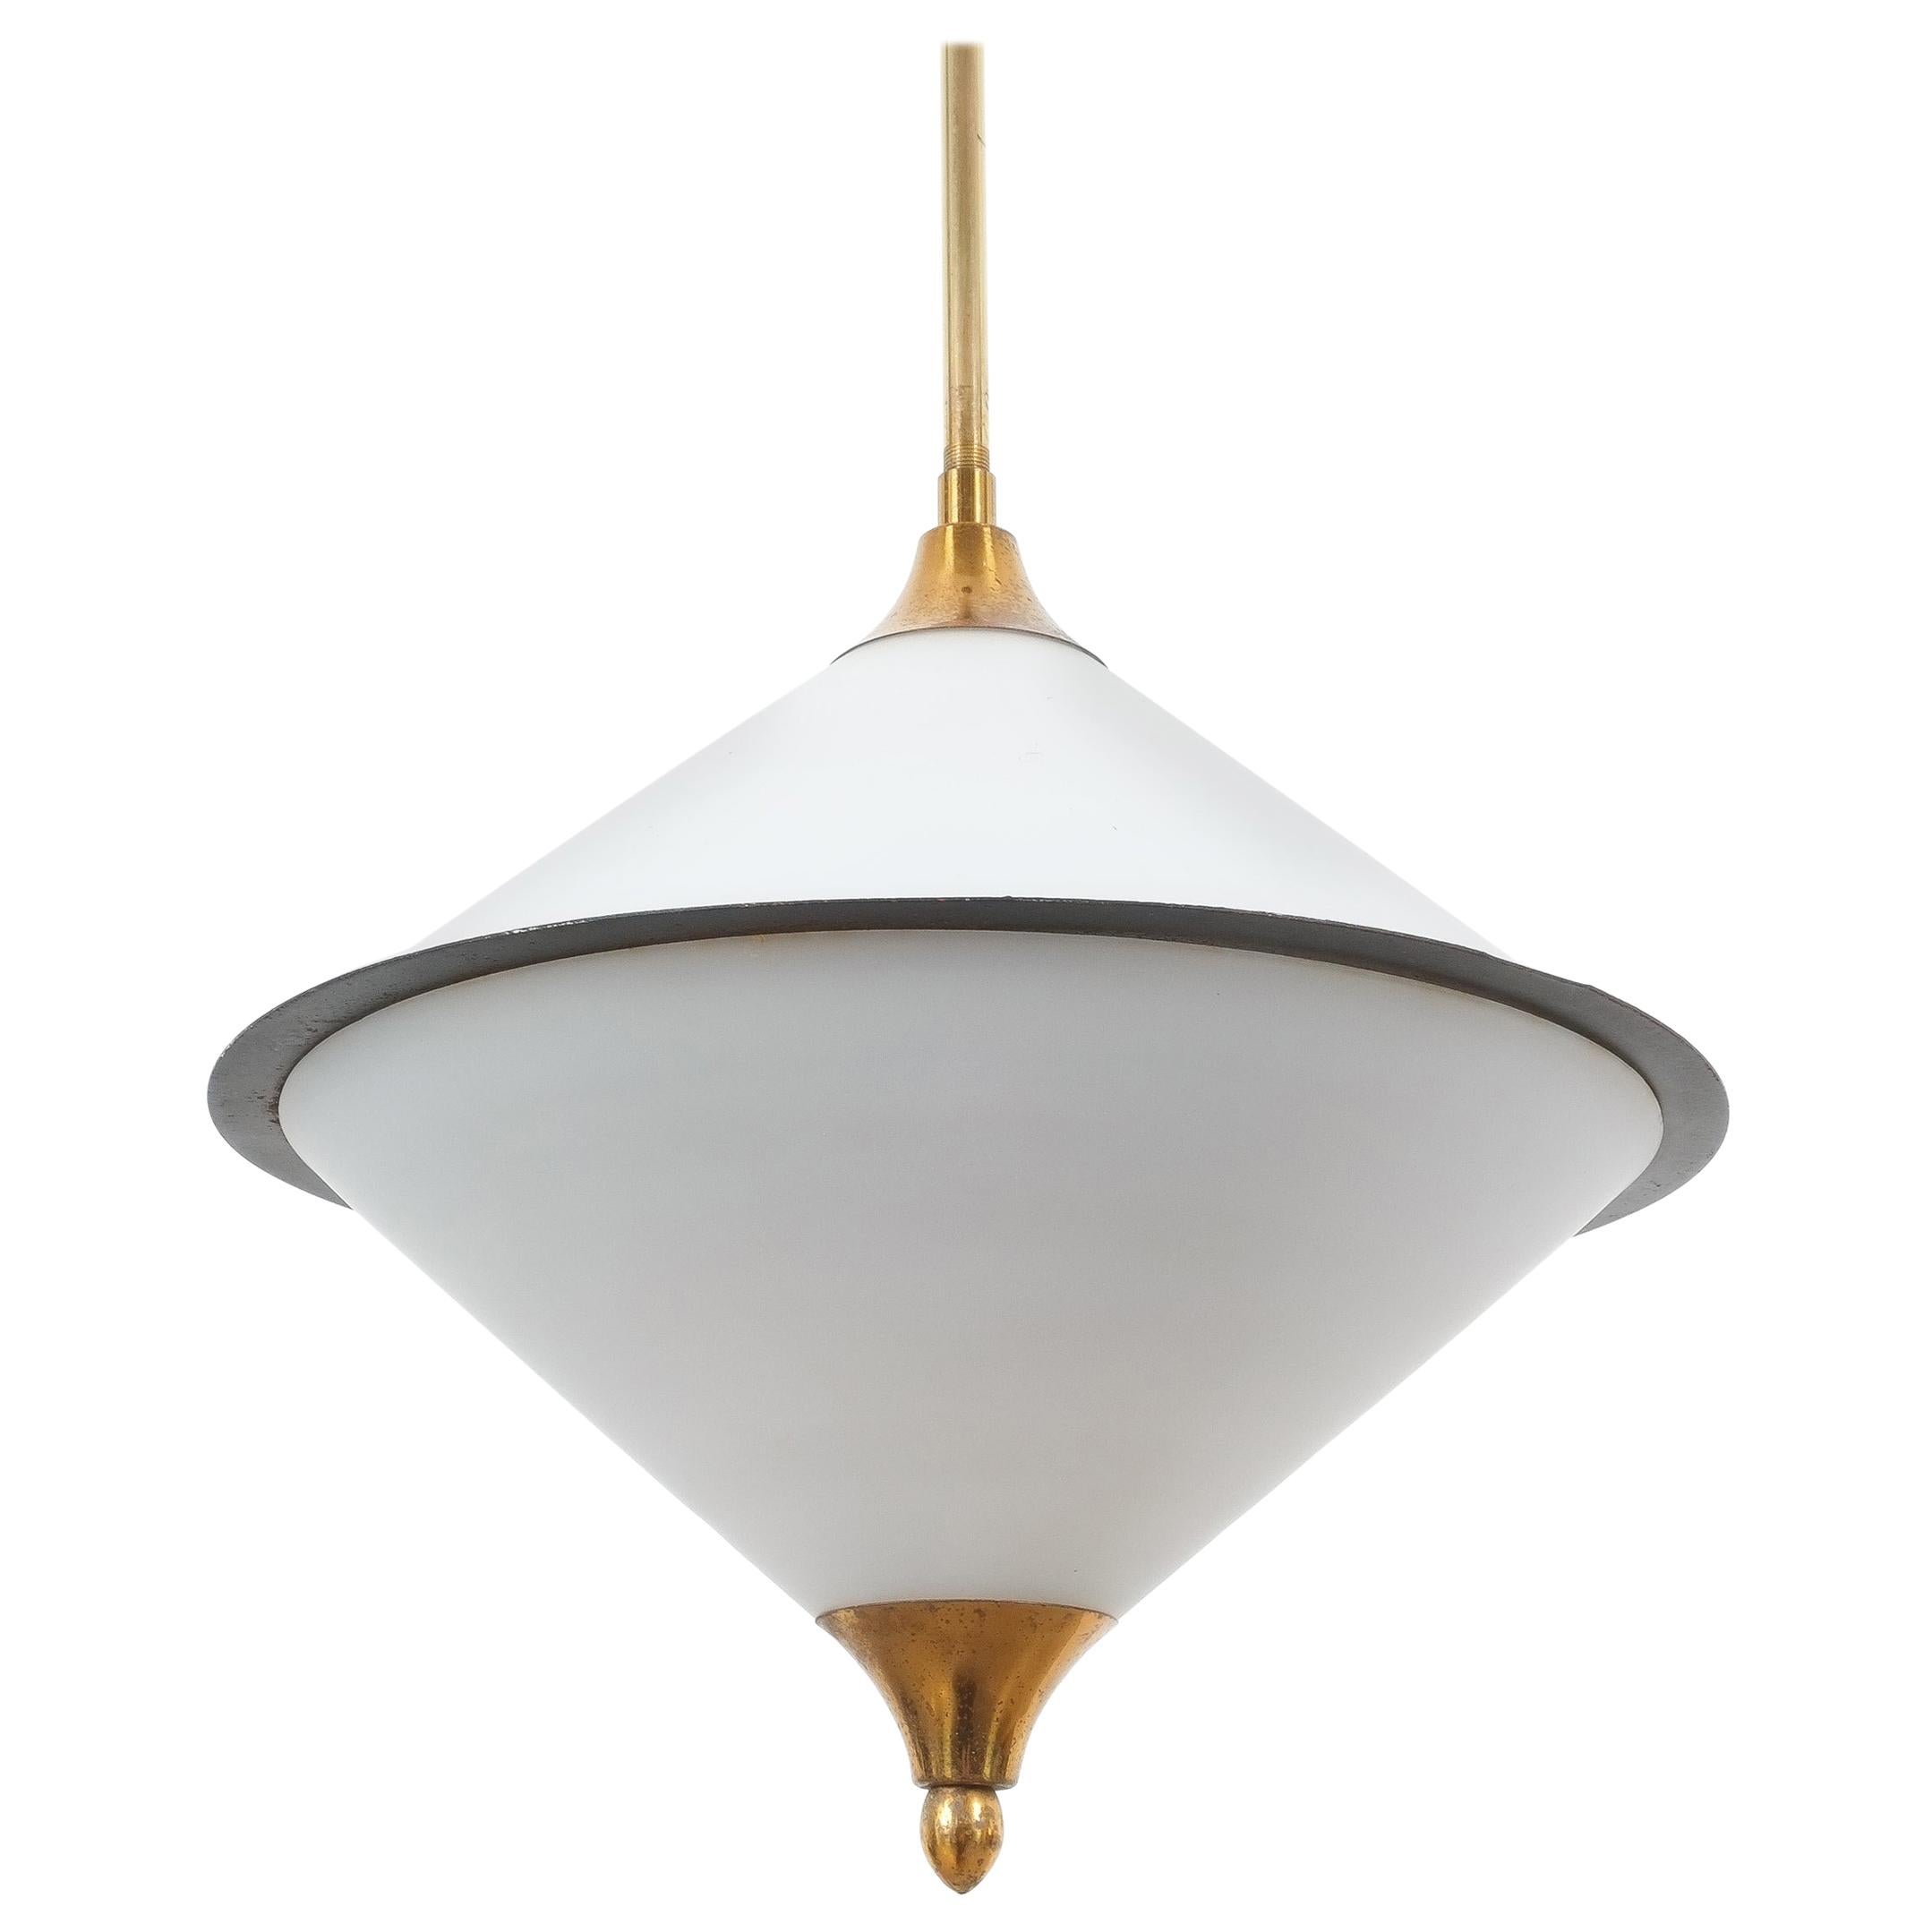 Rare Spin Top Shaped Pendant Lamp Opal Glass Attributed to Lelli, circa 1950 For Sale